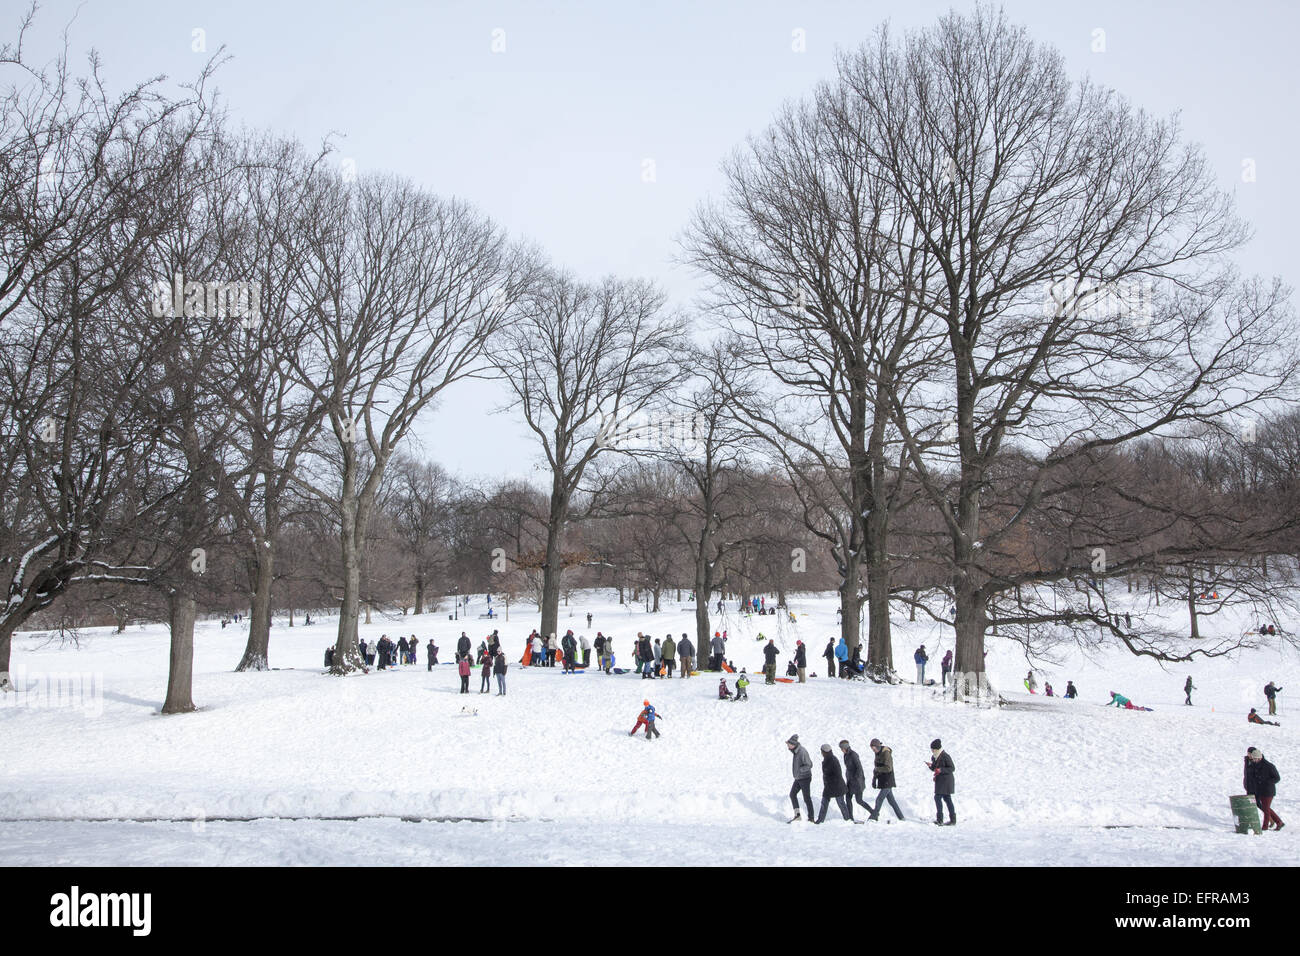 Families sledding and people just out enjoying Prospect Park after a snowfall in Park Slope, Brooklyn, NY. Stock Photo